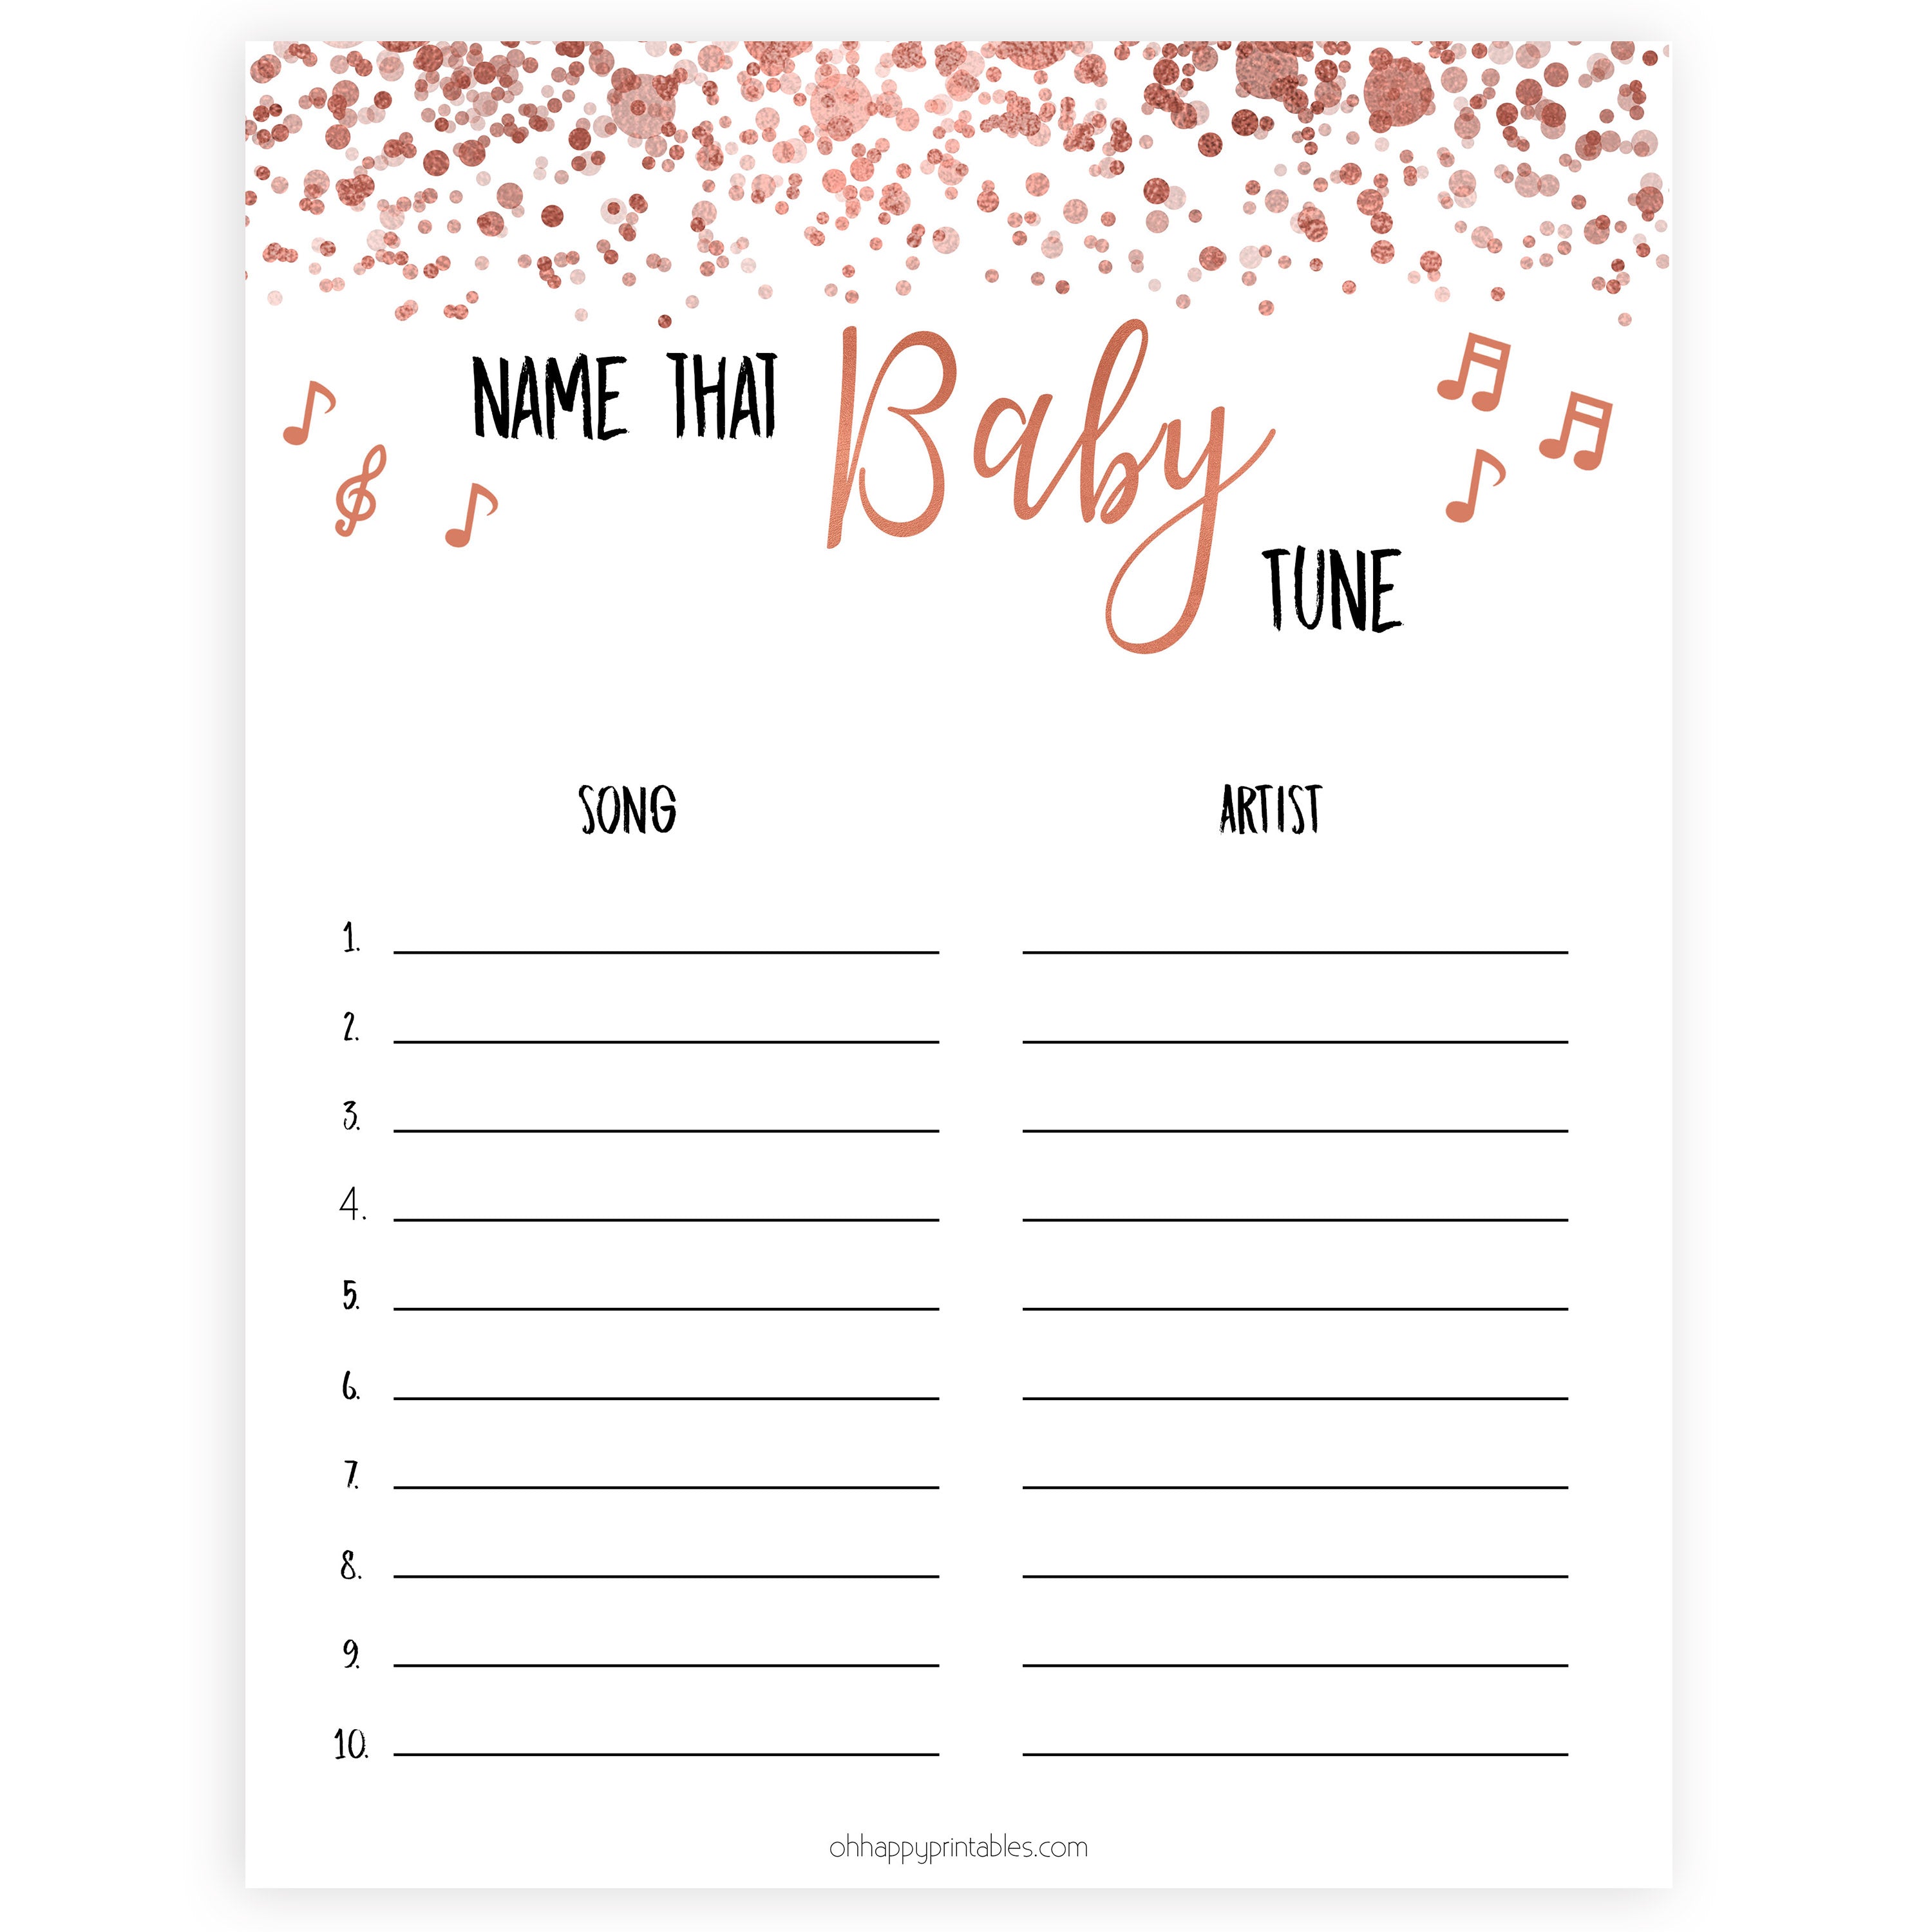 name that baby tune, baby shower games, rose gold baby shower game, popular baby shower game, fun baby shower game